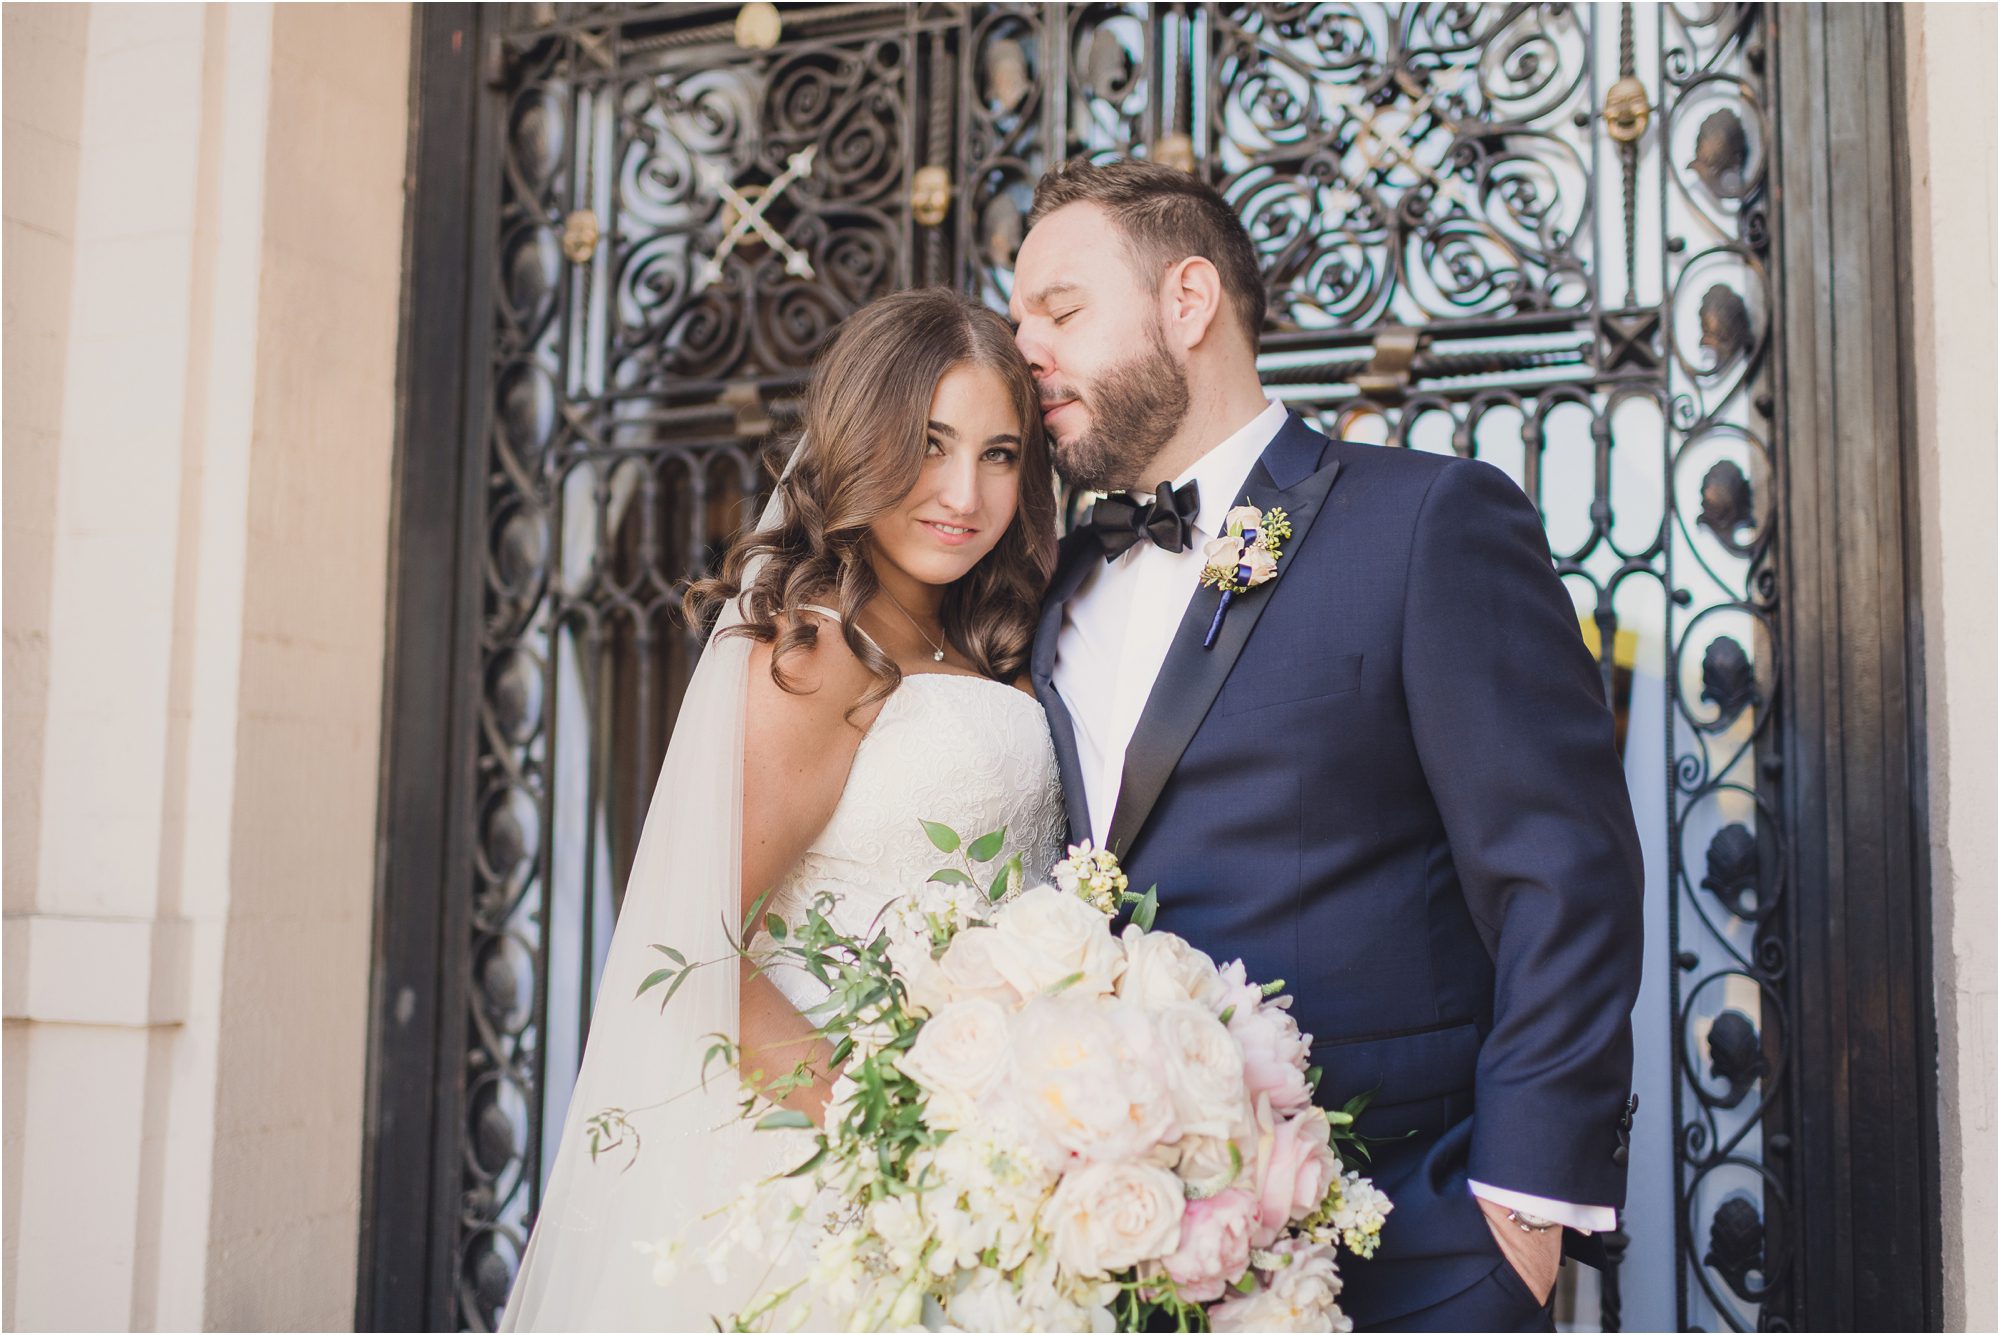 Rock and Jessica at their Romantic Ebell of Los Angeles Wedding